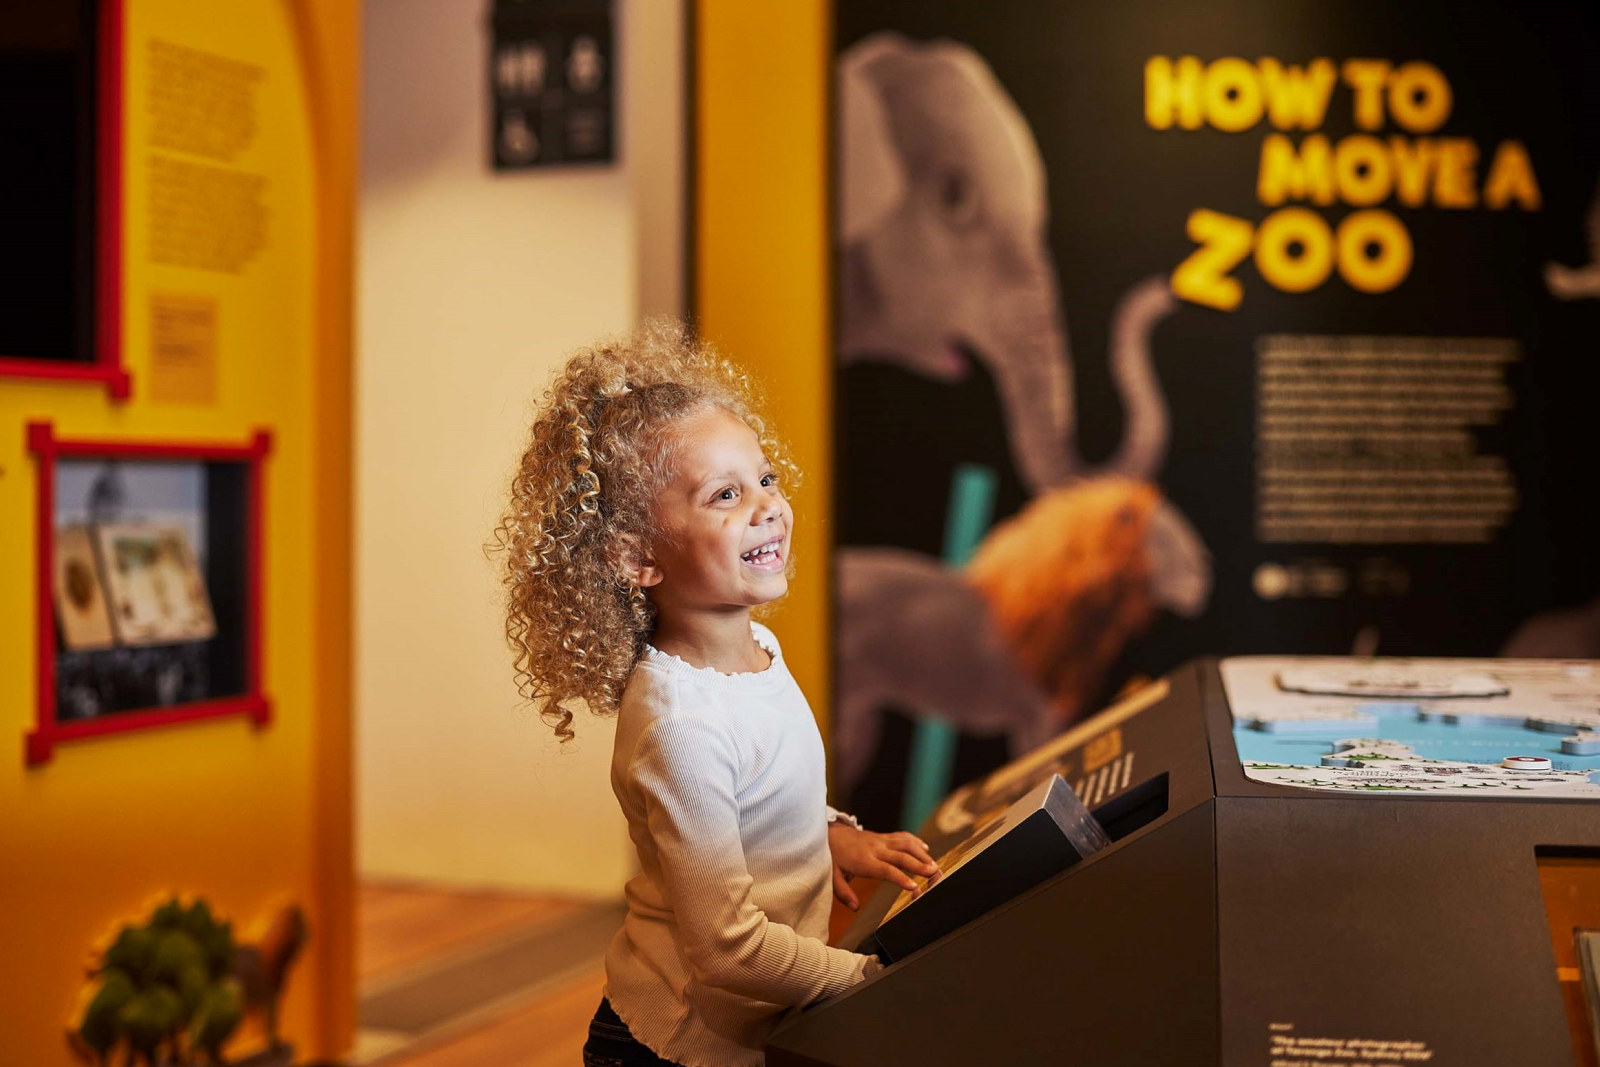 Child exploring the How to Move a Zoo exhibition.